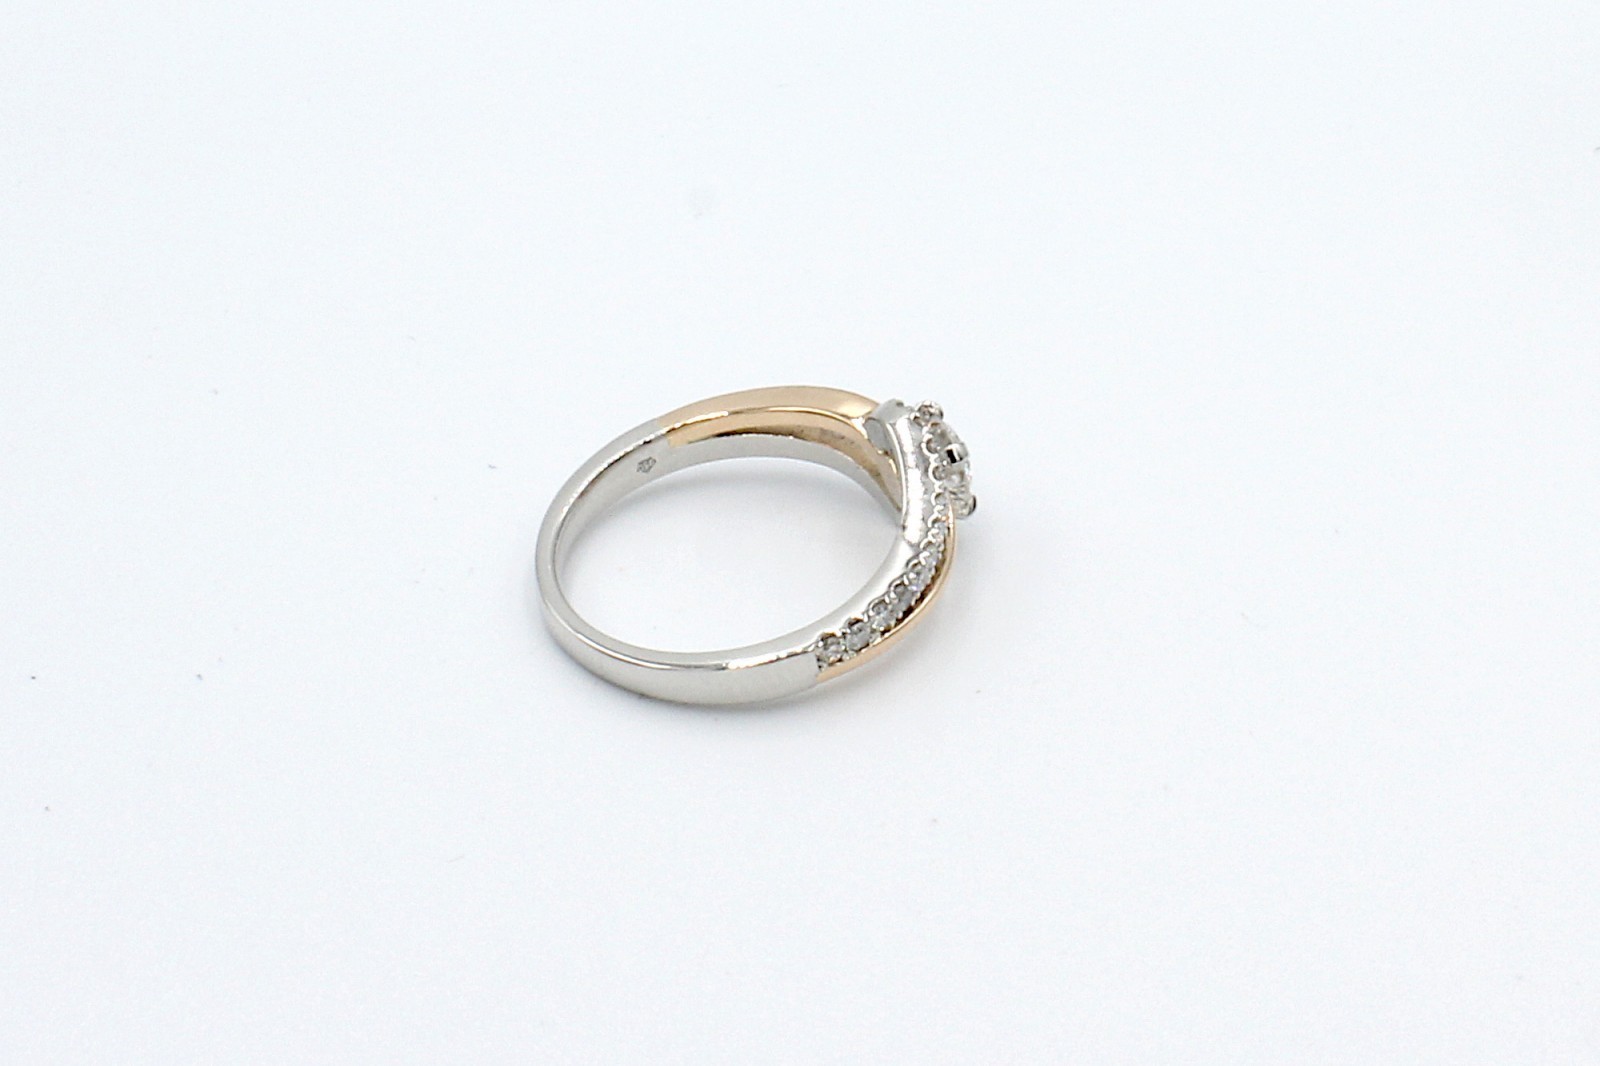 rear view of a repaired engagement ring on a white background